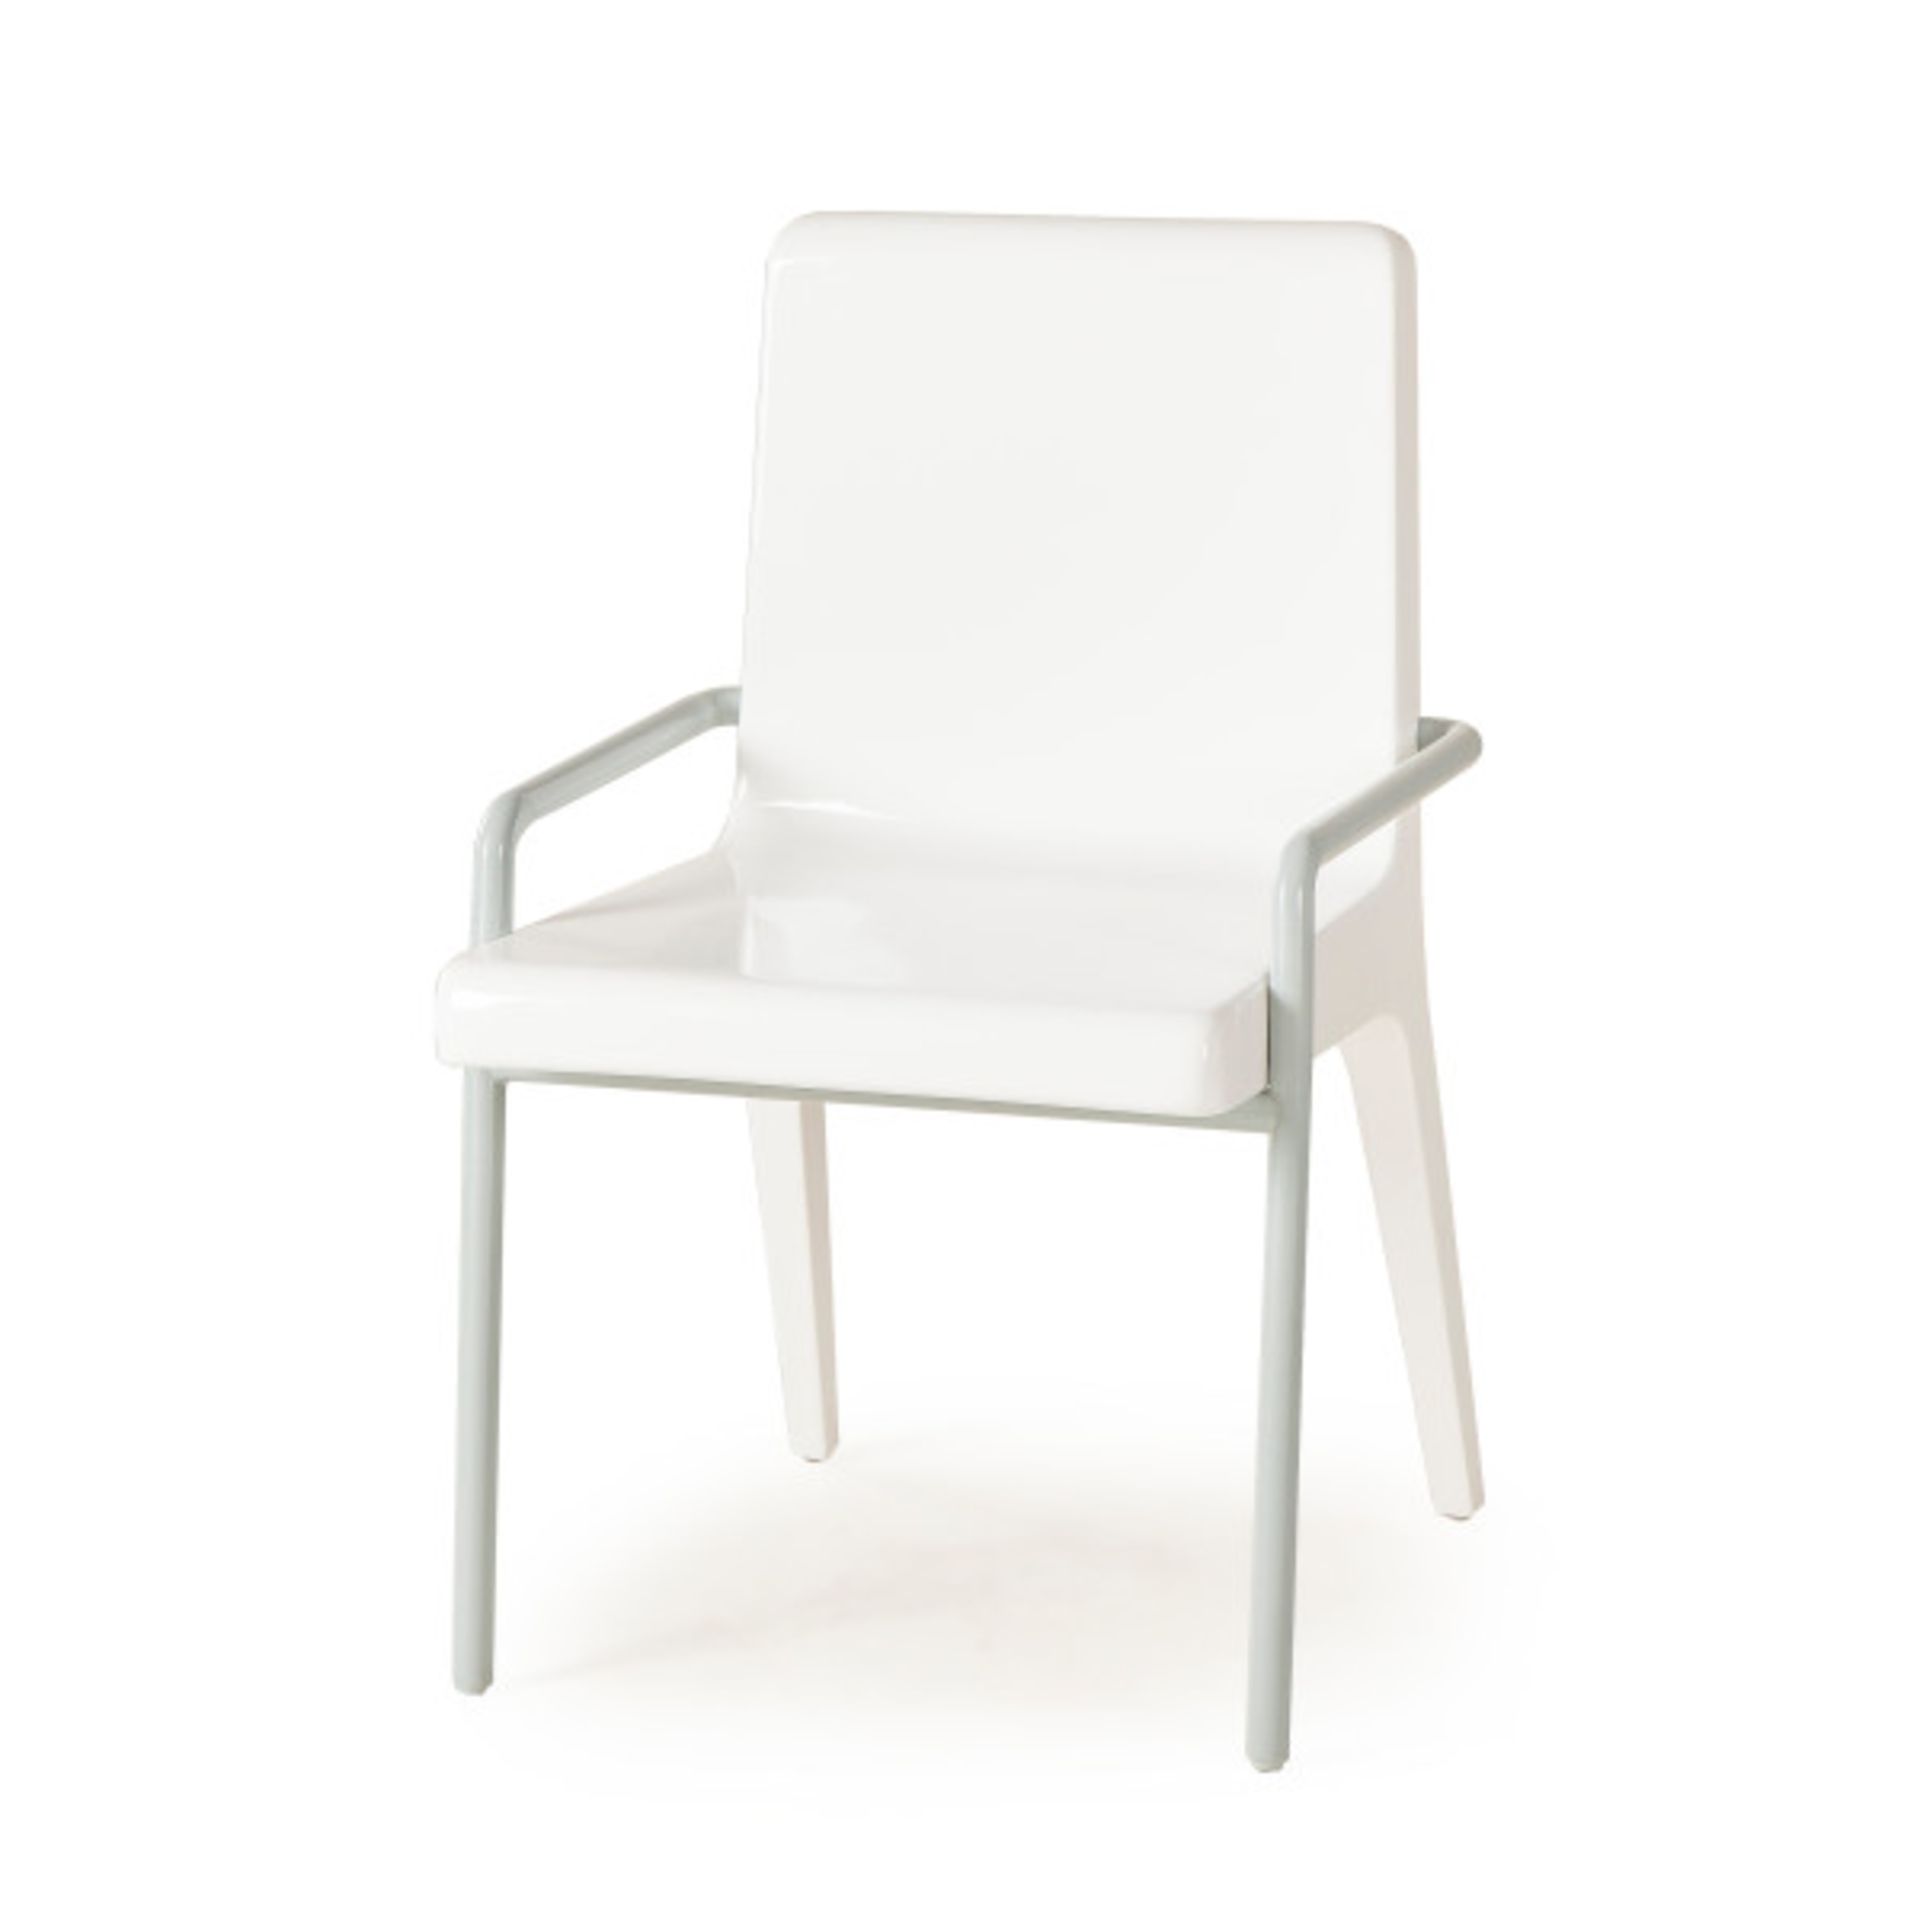 Tracey Boyd Seating Eden Chair 80 x 81 x 79 CMMSRP £806